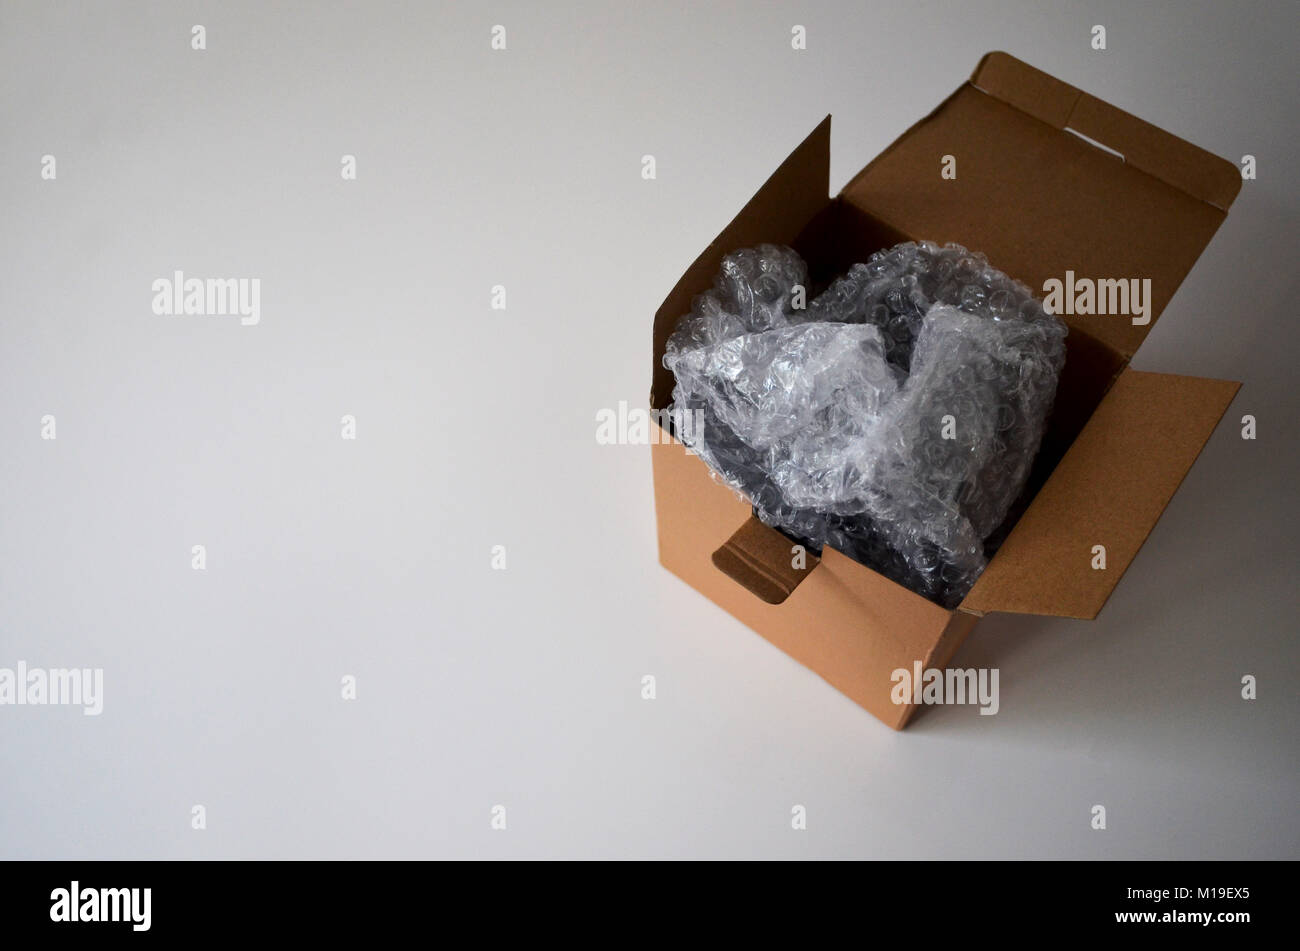 boxes and bubble wrap